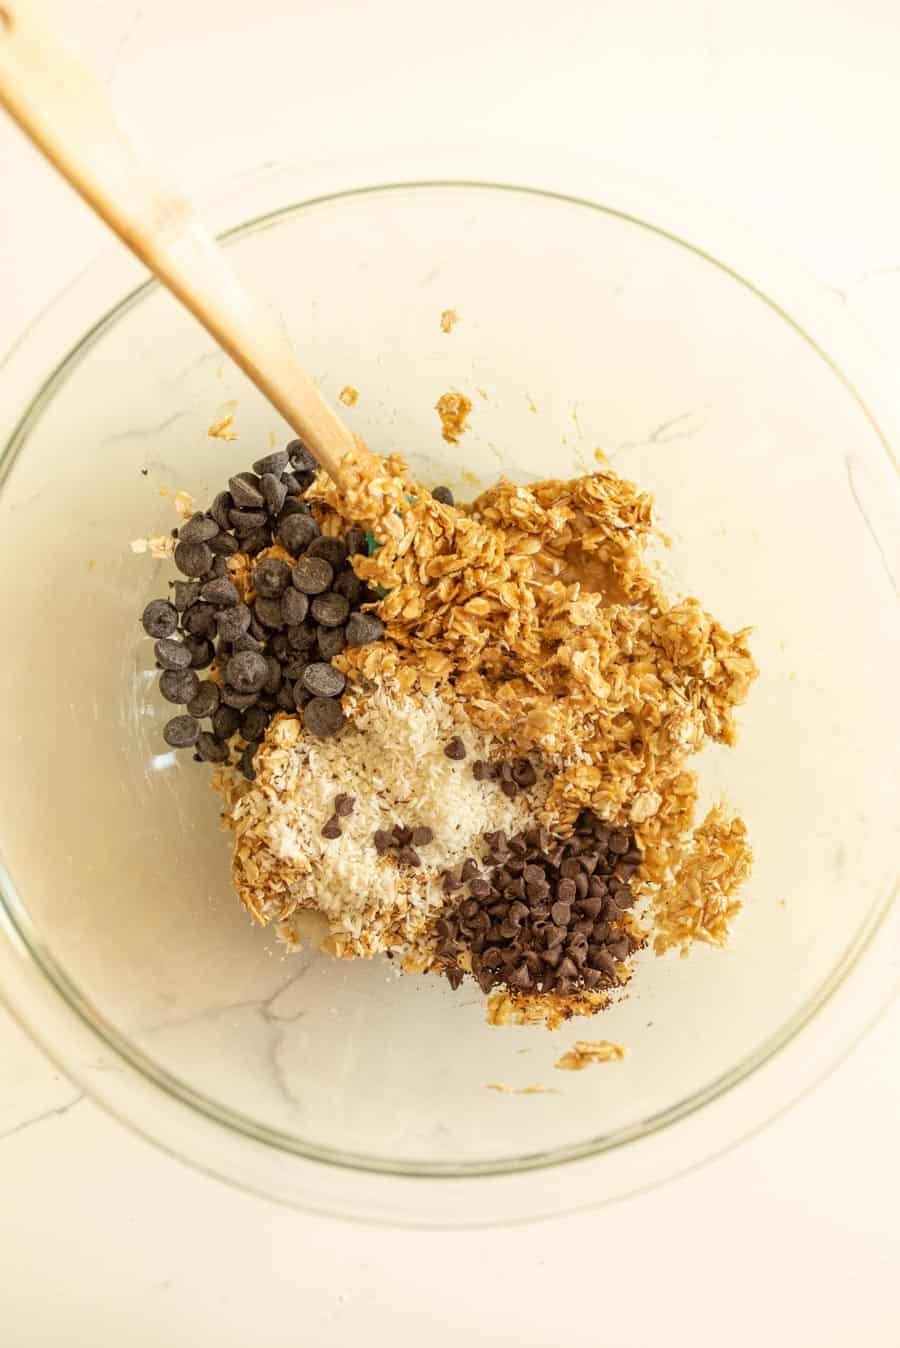 All of the ingredients for one of the no-bake oatmeal energy ball recipes in a clear glass bowl with a spatula with a wooden handle. 